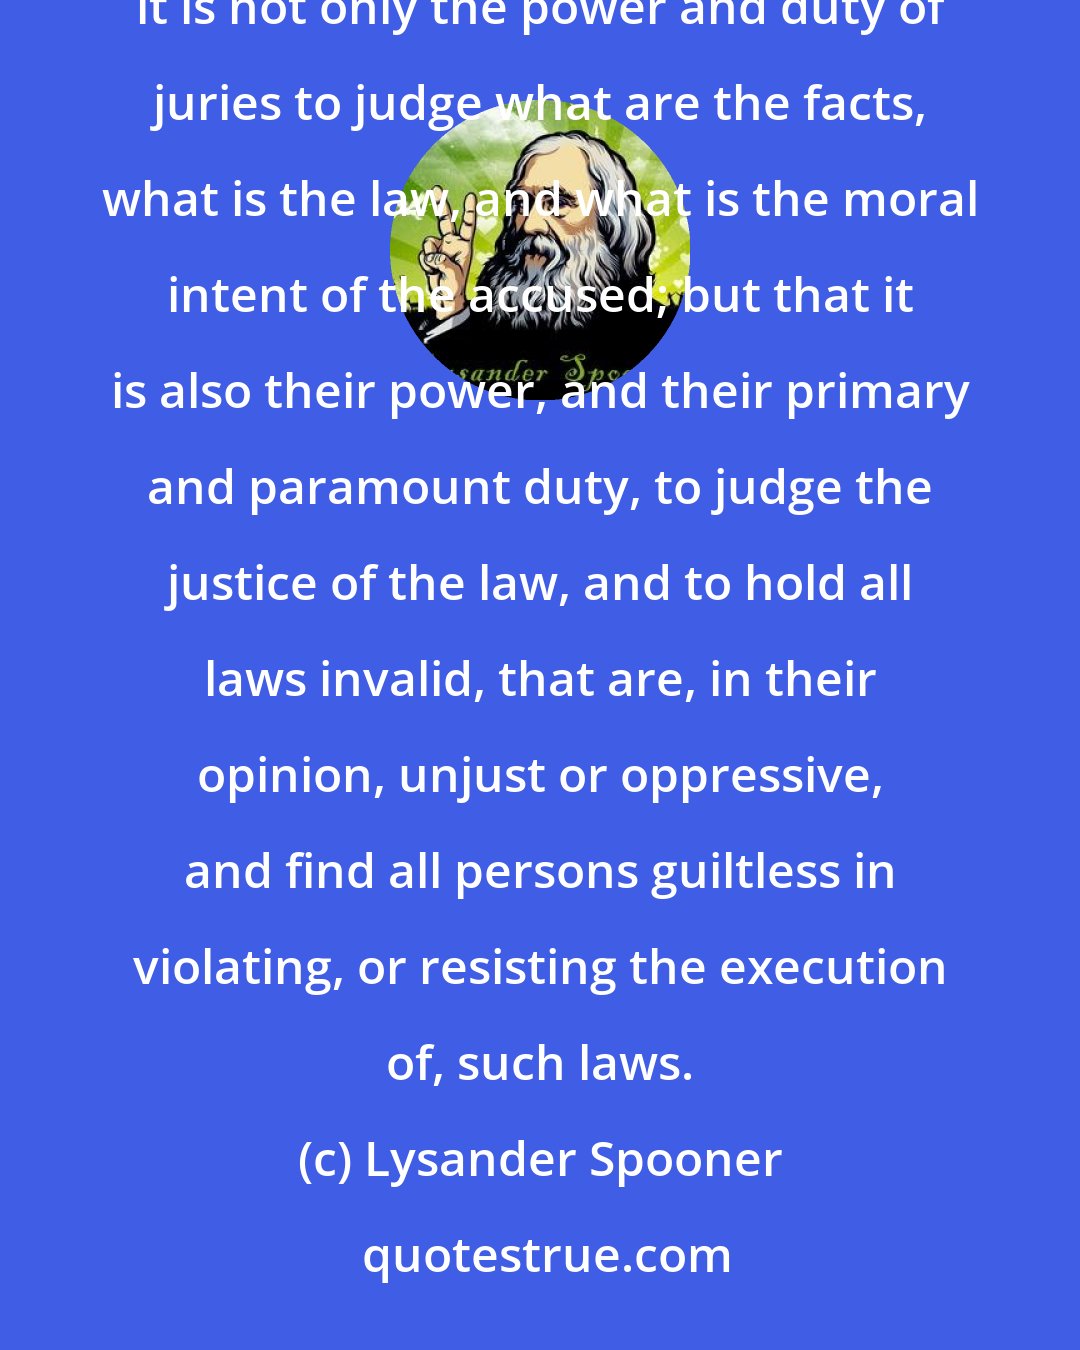 Lysander Spooner: There has been no clearer principle of English or American constitutional law than that, in criminal cases, it is not only the power and duty of juries to judge what are the facts, what is the law, and what is the moral intent of the accused; but that it is also their power, and their primary and paramount duty, to judge the justice of the law, and to hold all laws invalid, that are, in their opinion, unjust or oppressive, and find all persons guiltless in violating, or resisting the execution of, such laws.